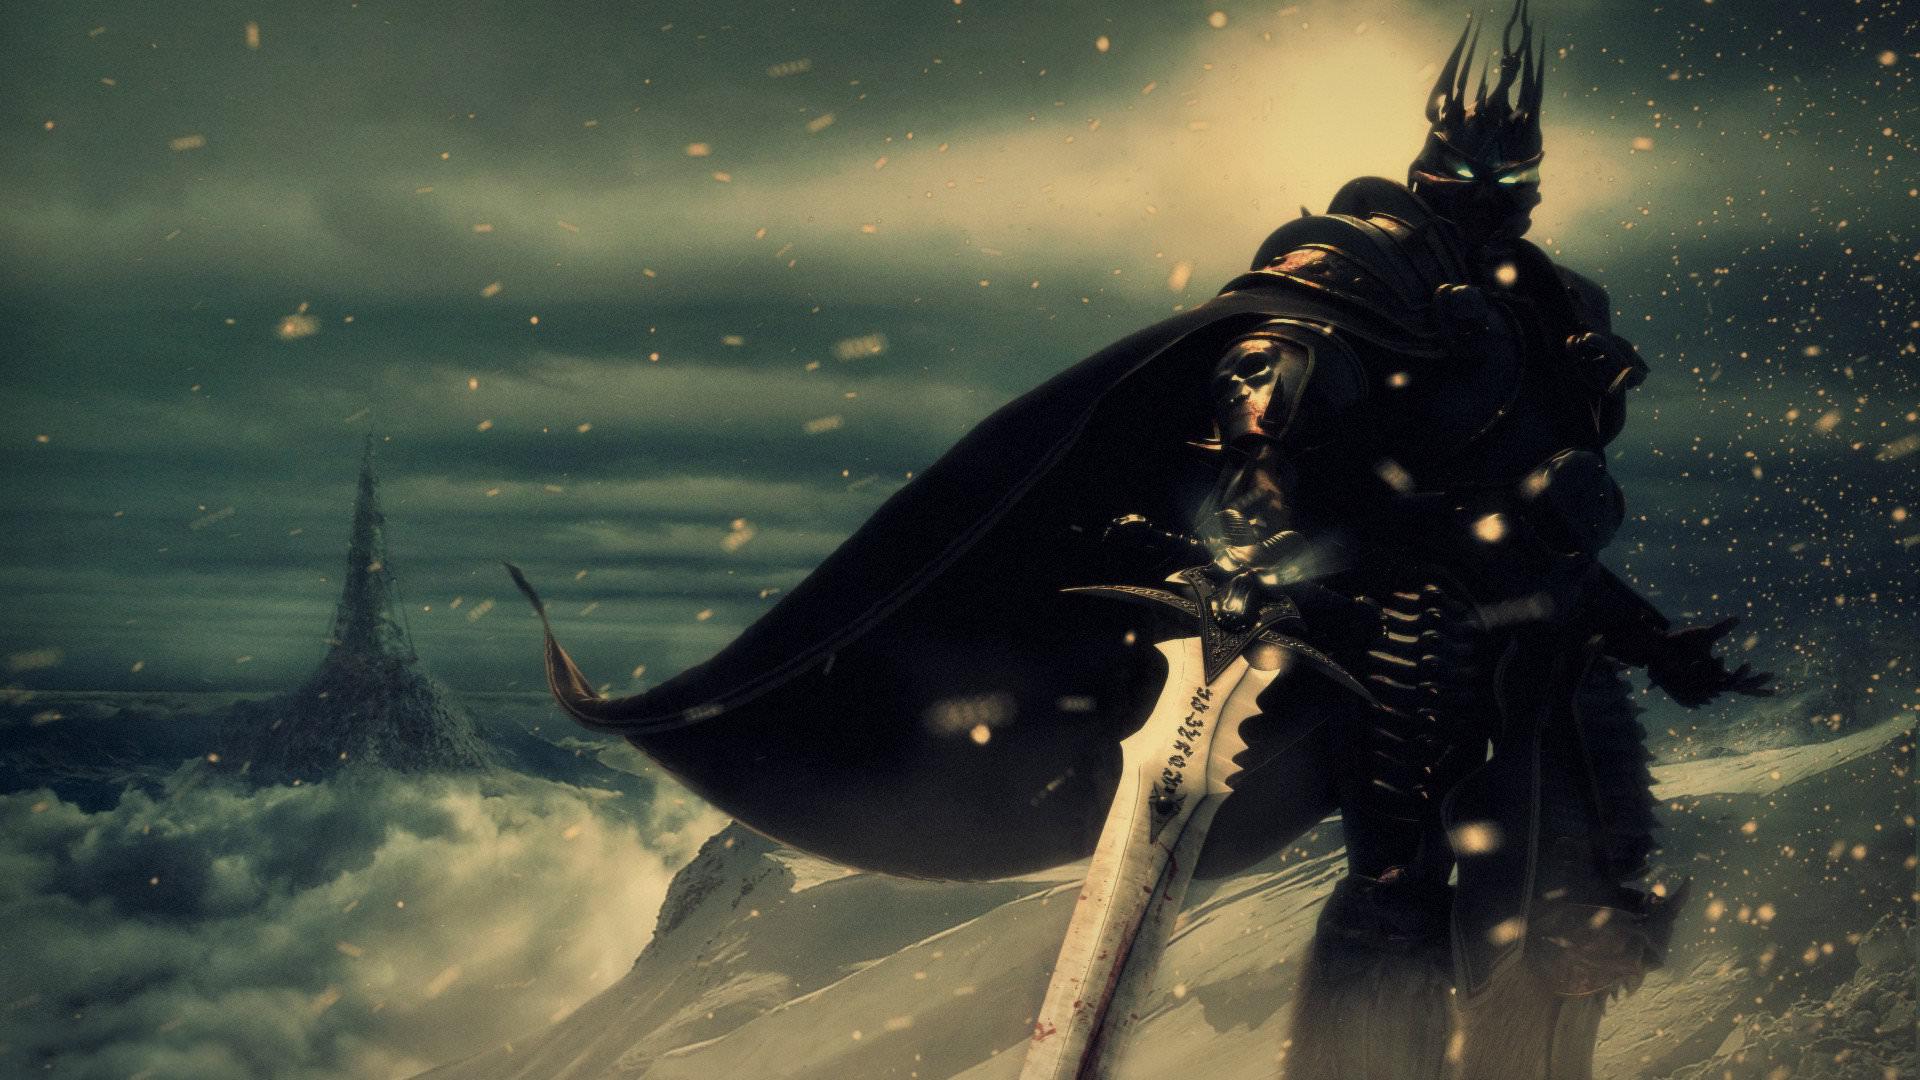 World Of Warcraft: Wrath Of The Lich King wallpaper 1920x1080 Full